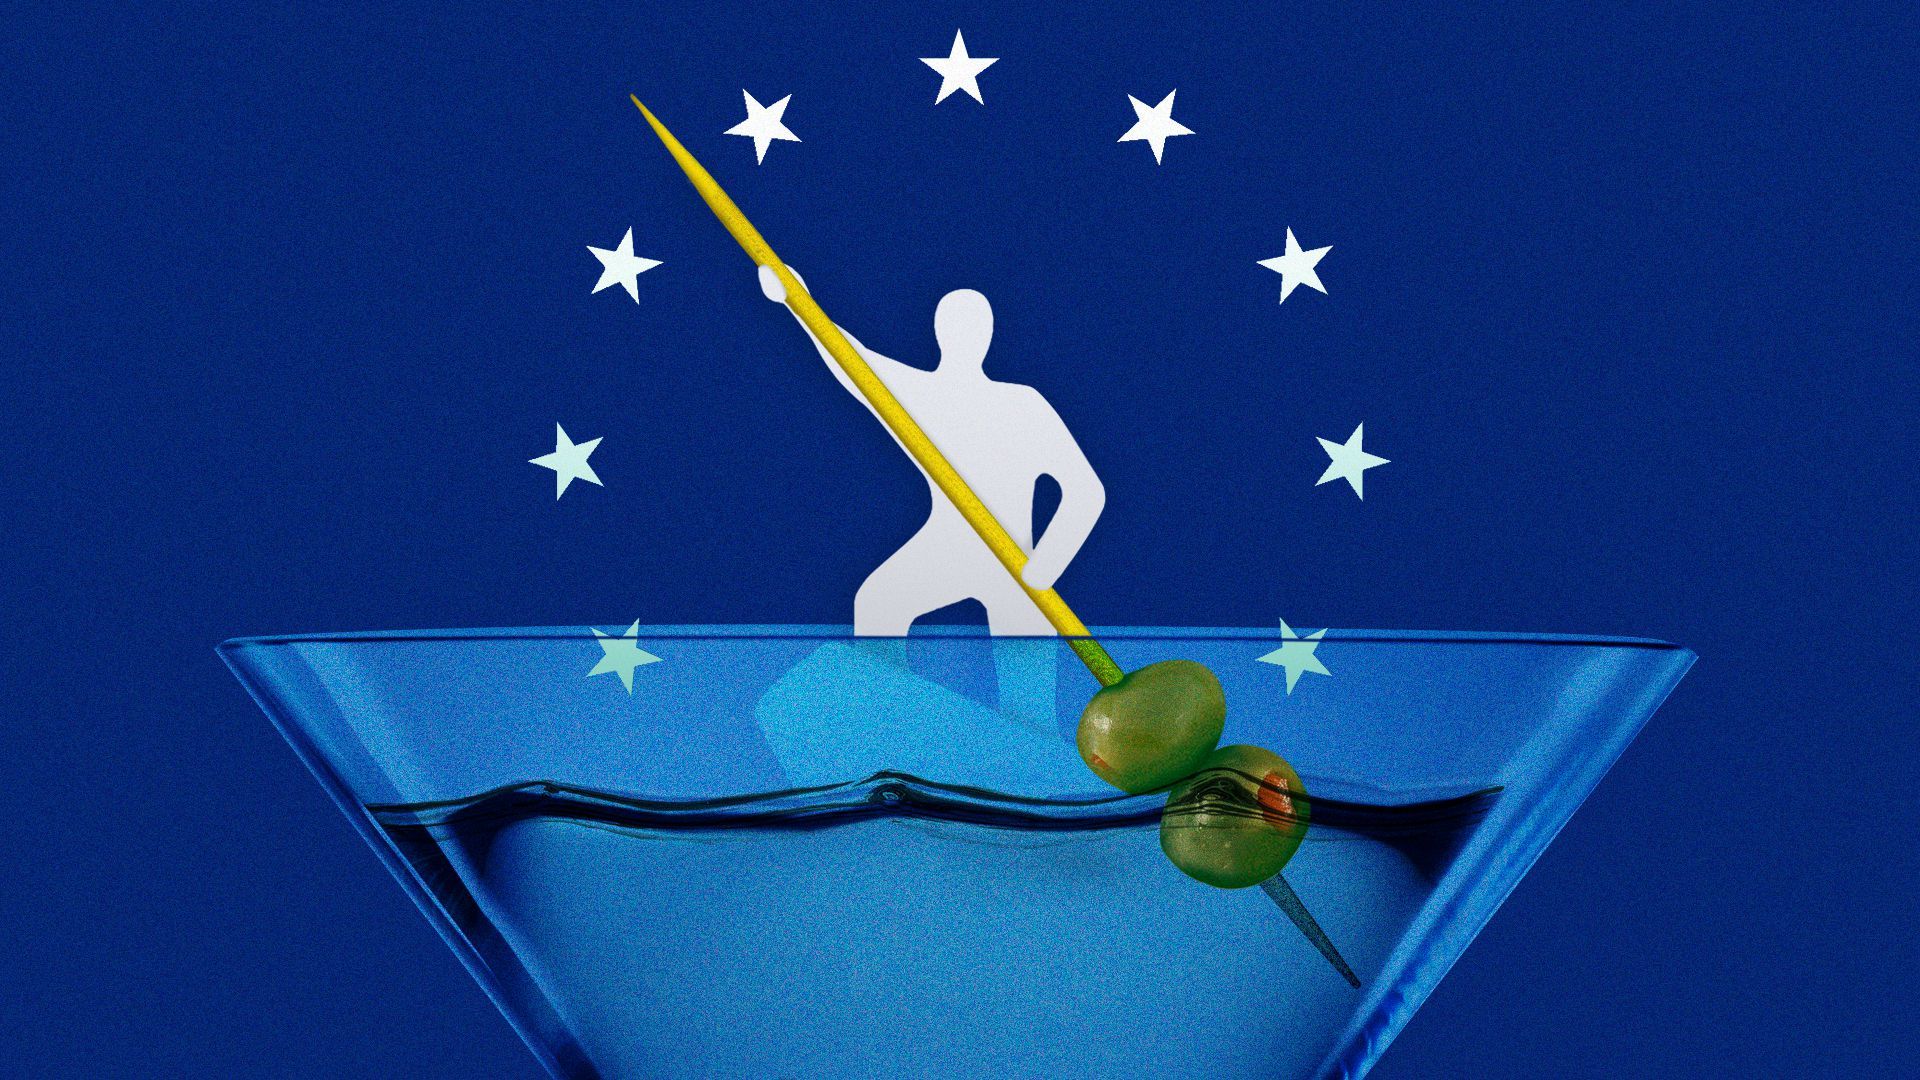 Illustration of the man from the Richmond city flag rowing through a martini glass.